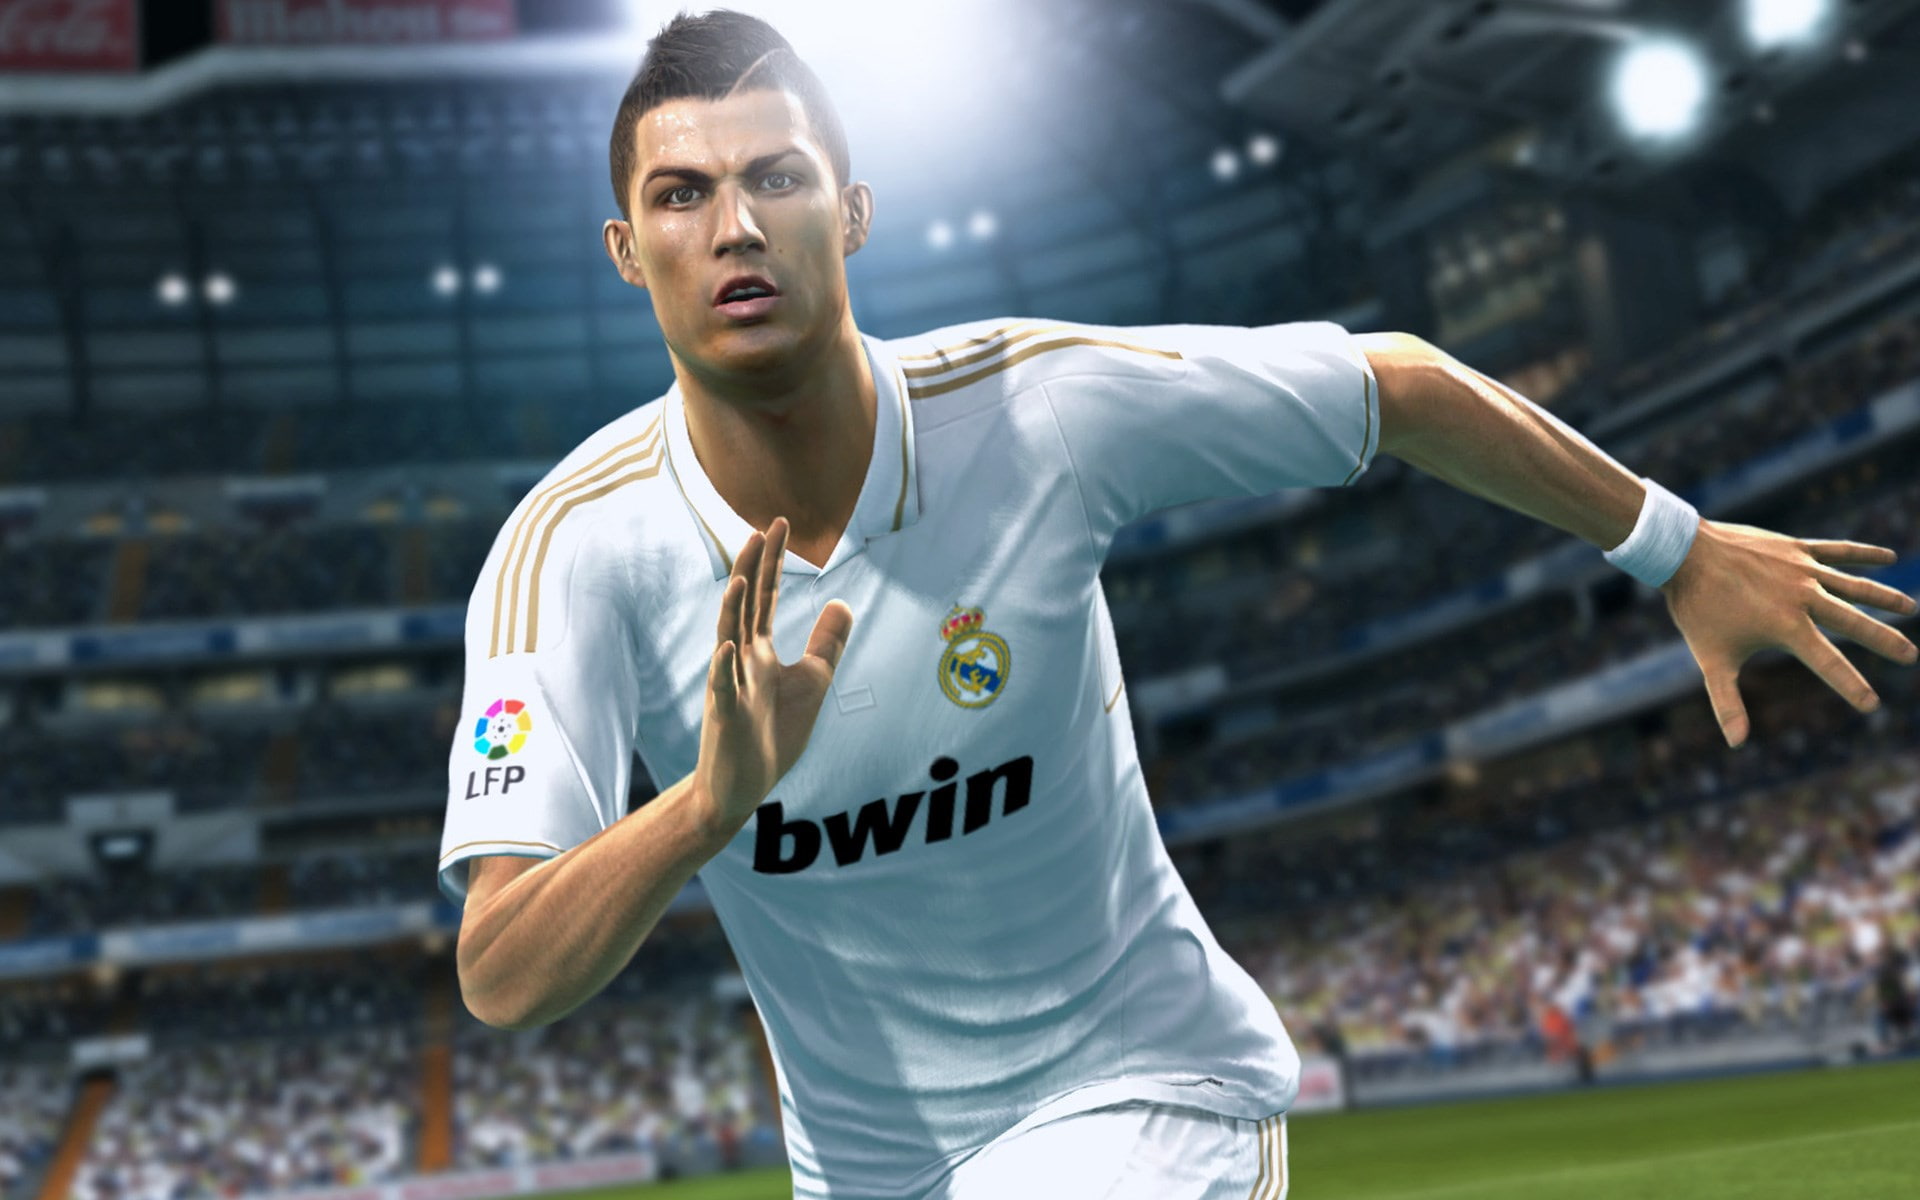 cr7 photo backgrounds, young adult, one person, sport, stadium